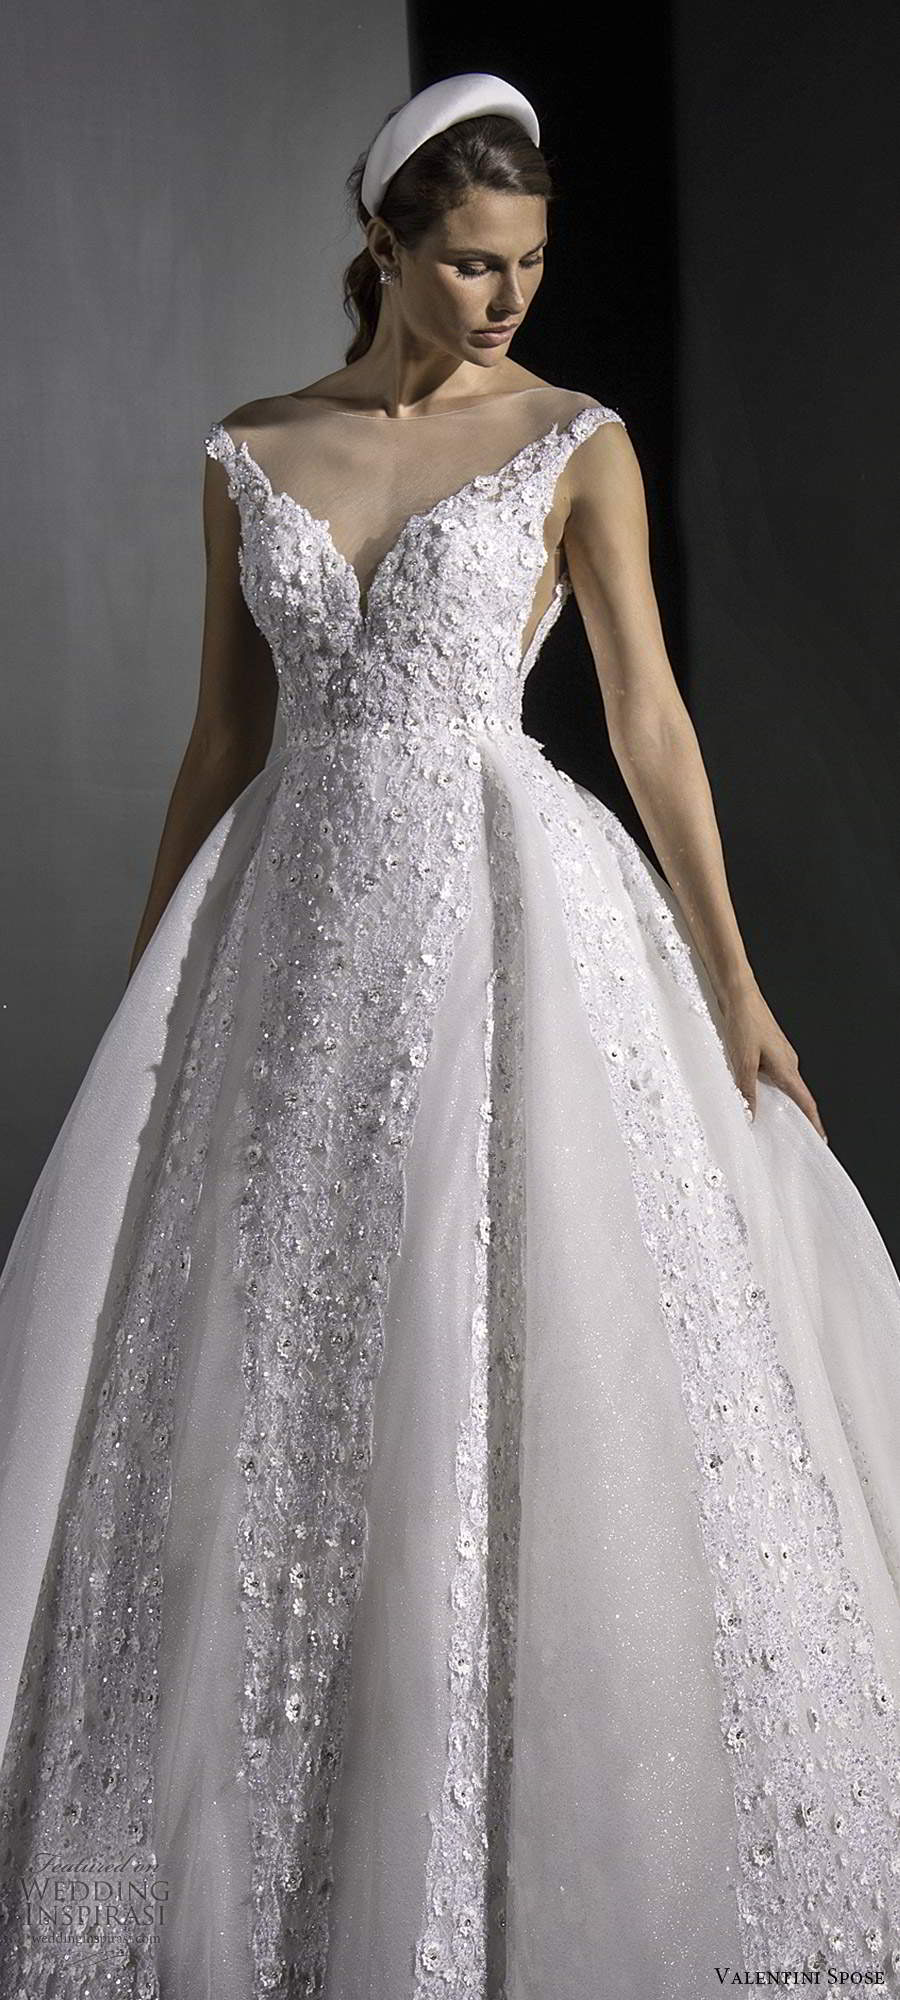 valentini spose fall 2020 bridal sleeveless off shoulder sweetheart neckline fully embellished a line ball gown wedding dress chapel train (5) lv